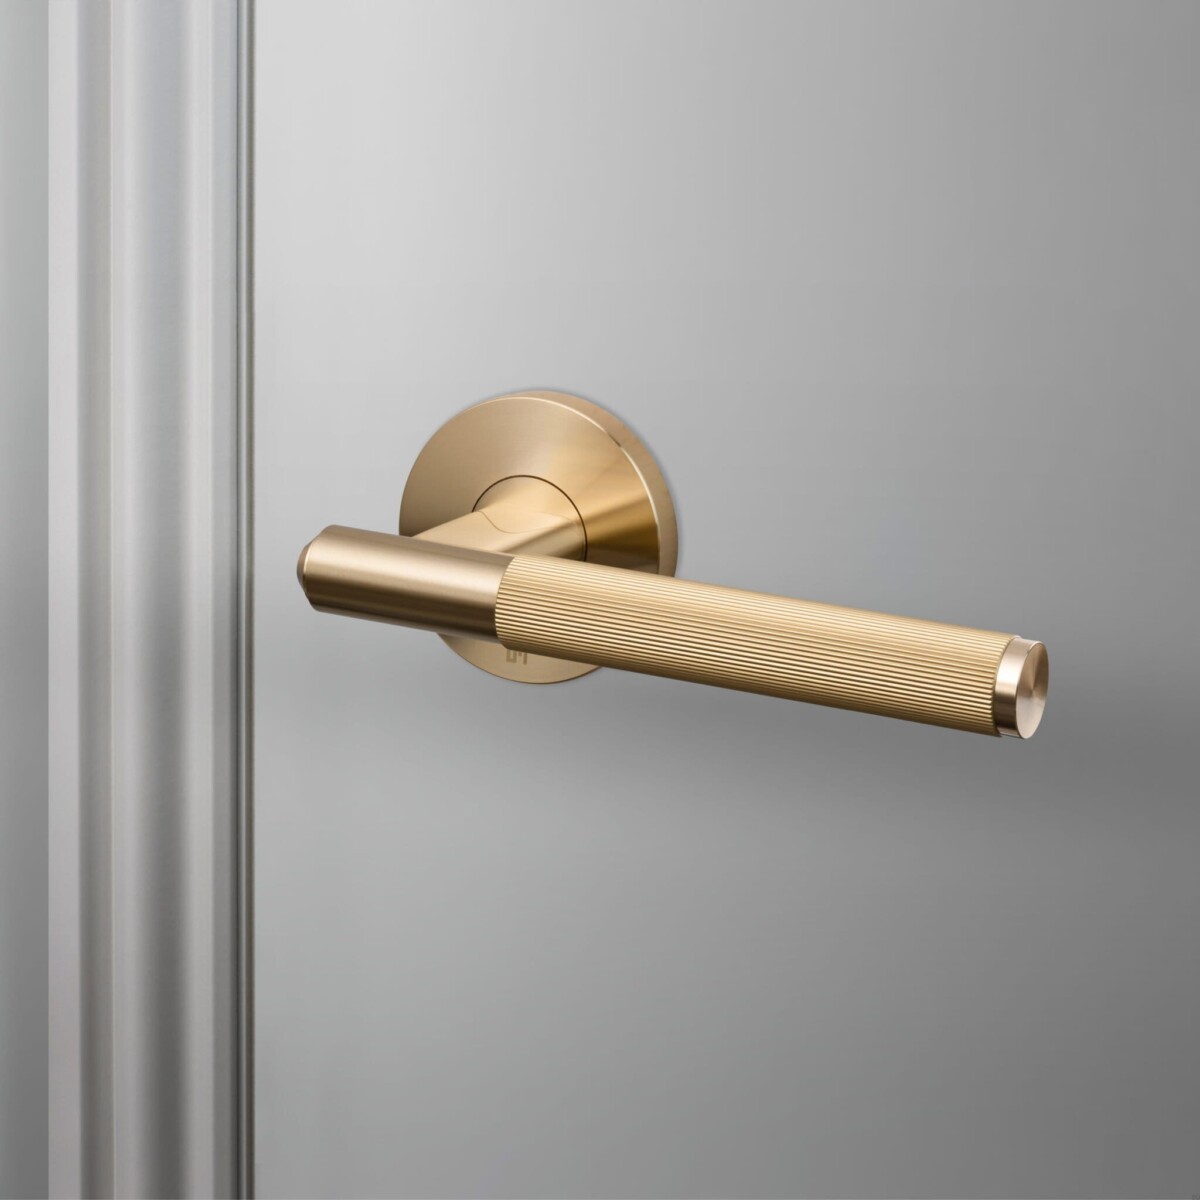 ROW_Door-handle_Linear_Brass_A1_Web_Square-2048×2048